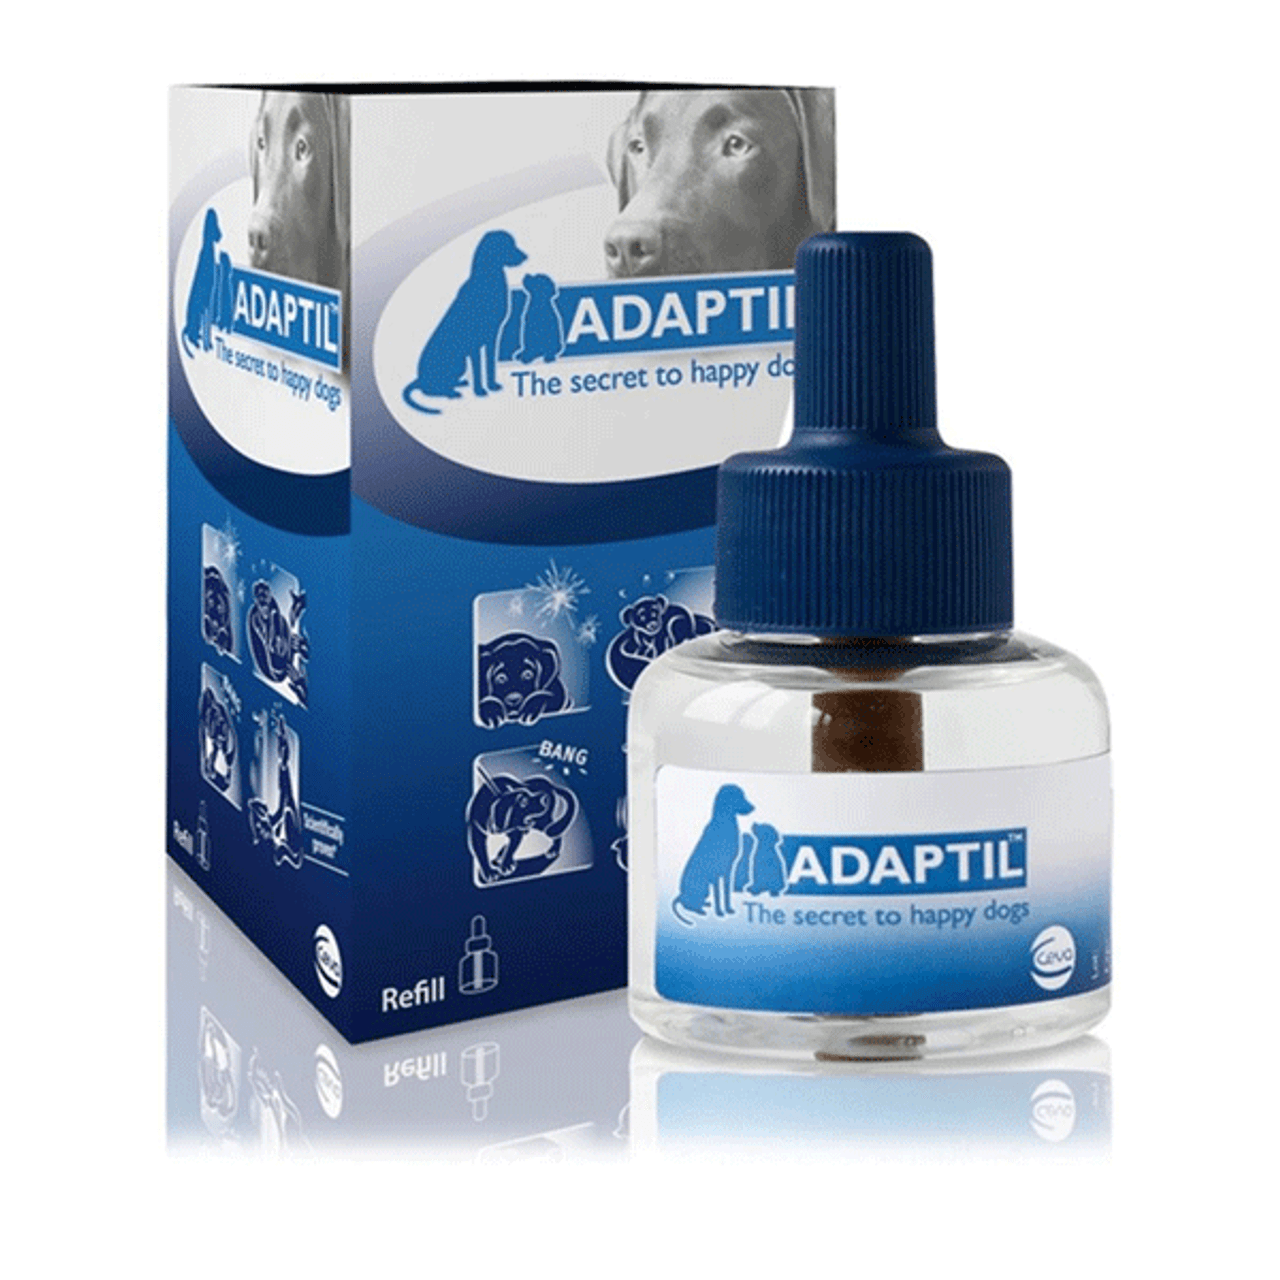 Adaptil Diffuser 48ml Refill Only